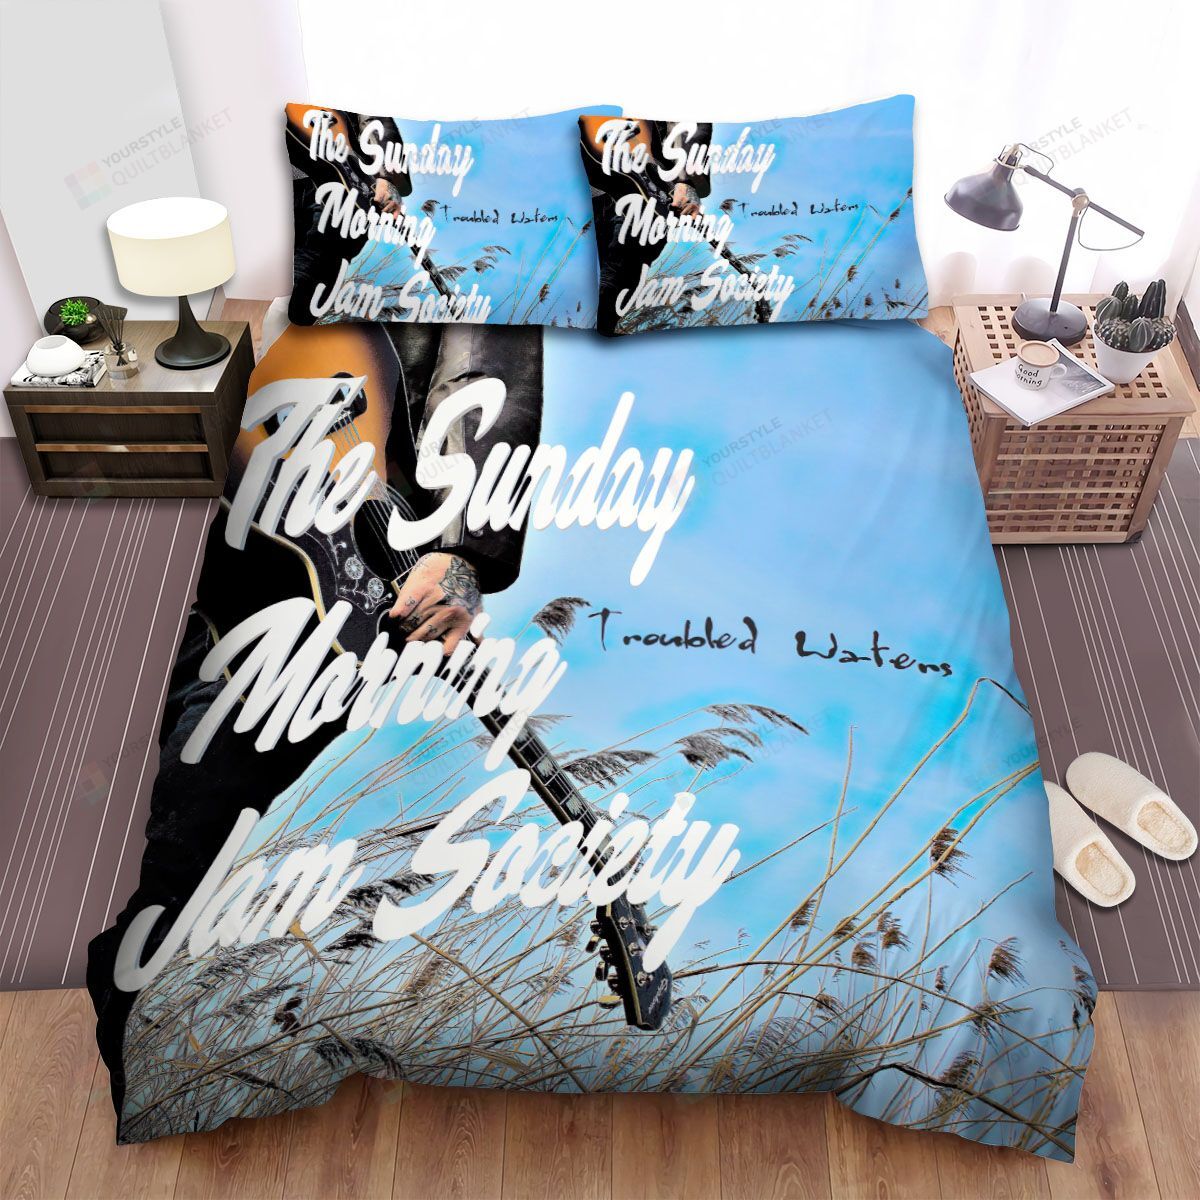 Mercyme The Sunday Morning Cover Bed Sheets Spread Comforter Duvet Cover Bedding Sets